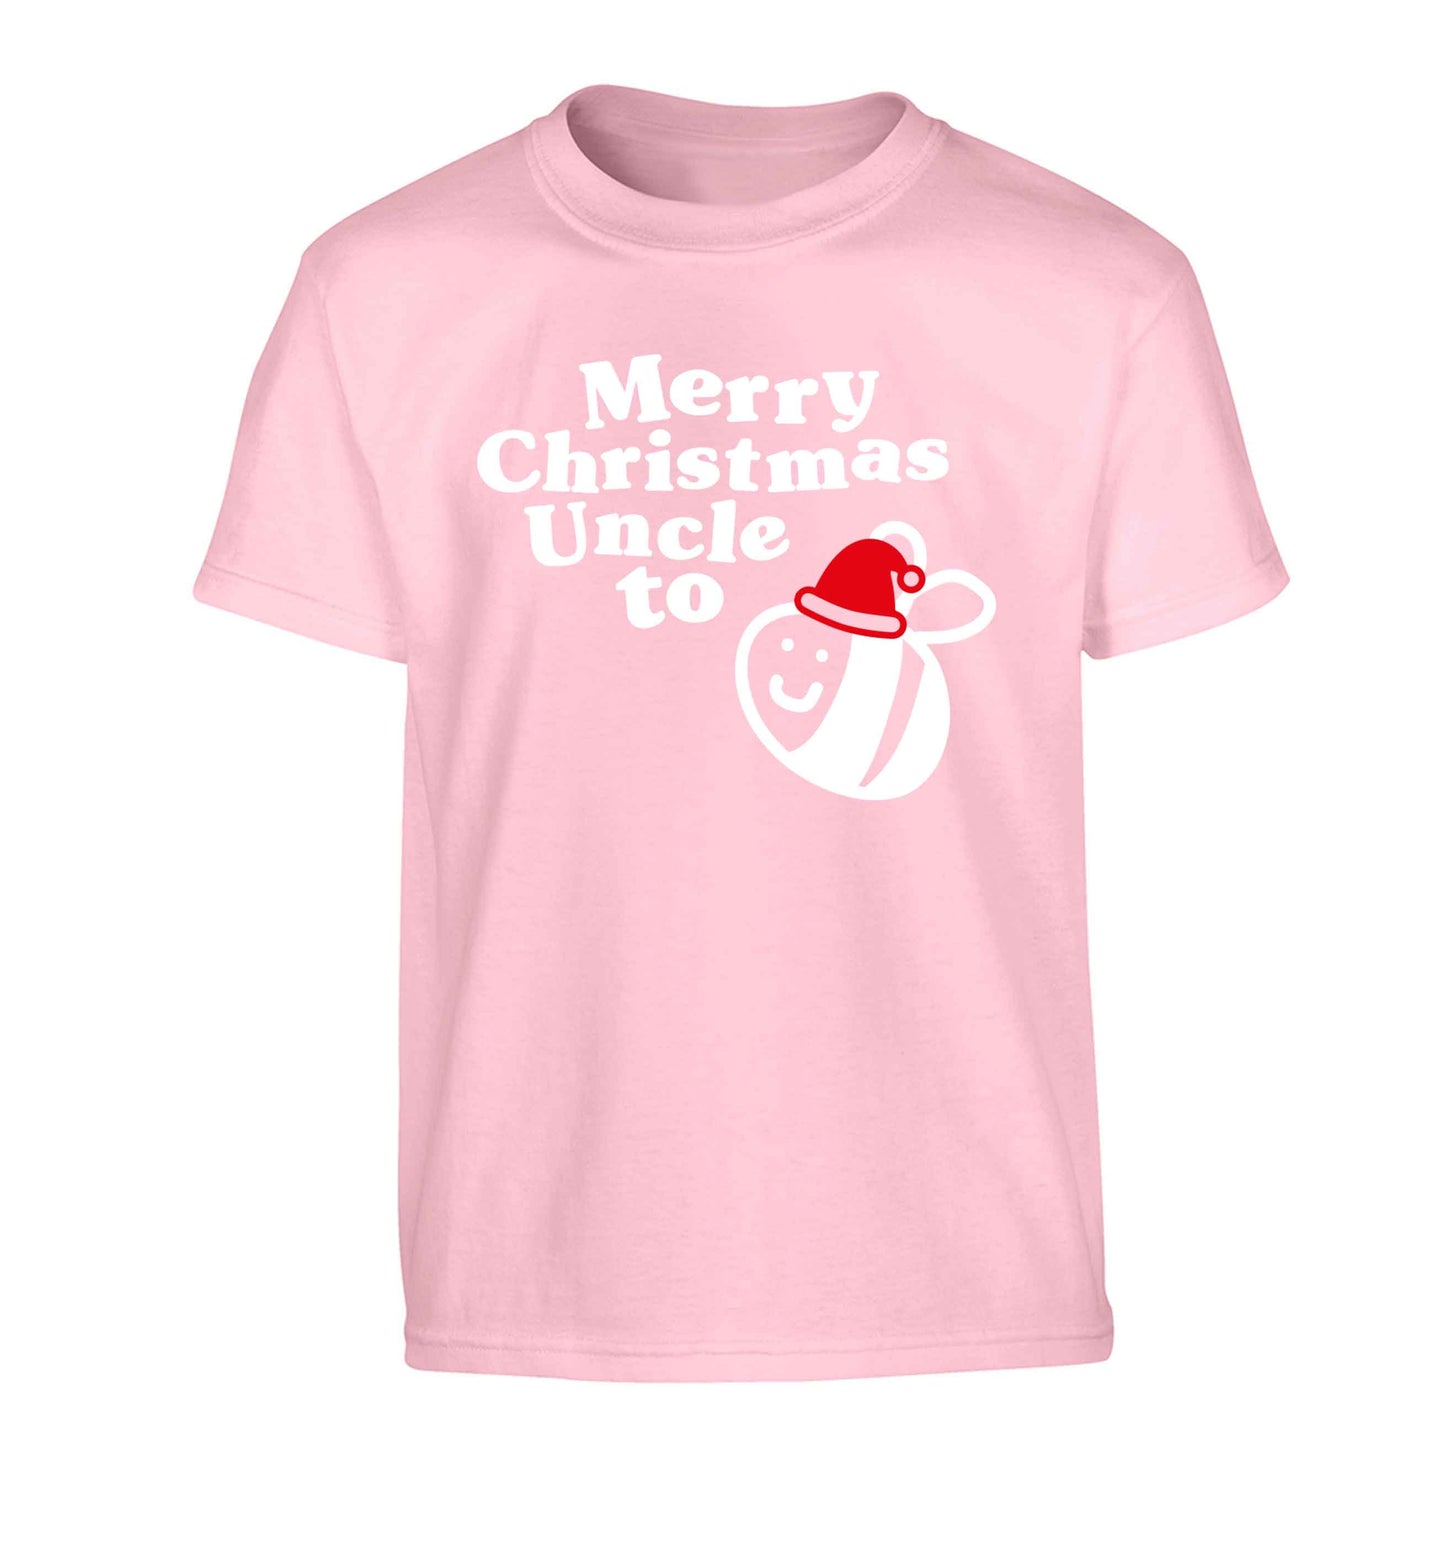 Merry Christmas uncle to be Children's light pink Tshirt 12-13 Years